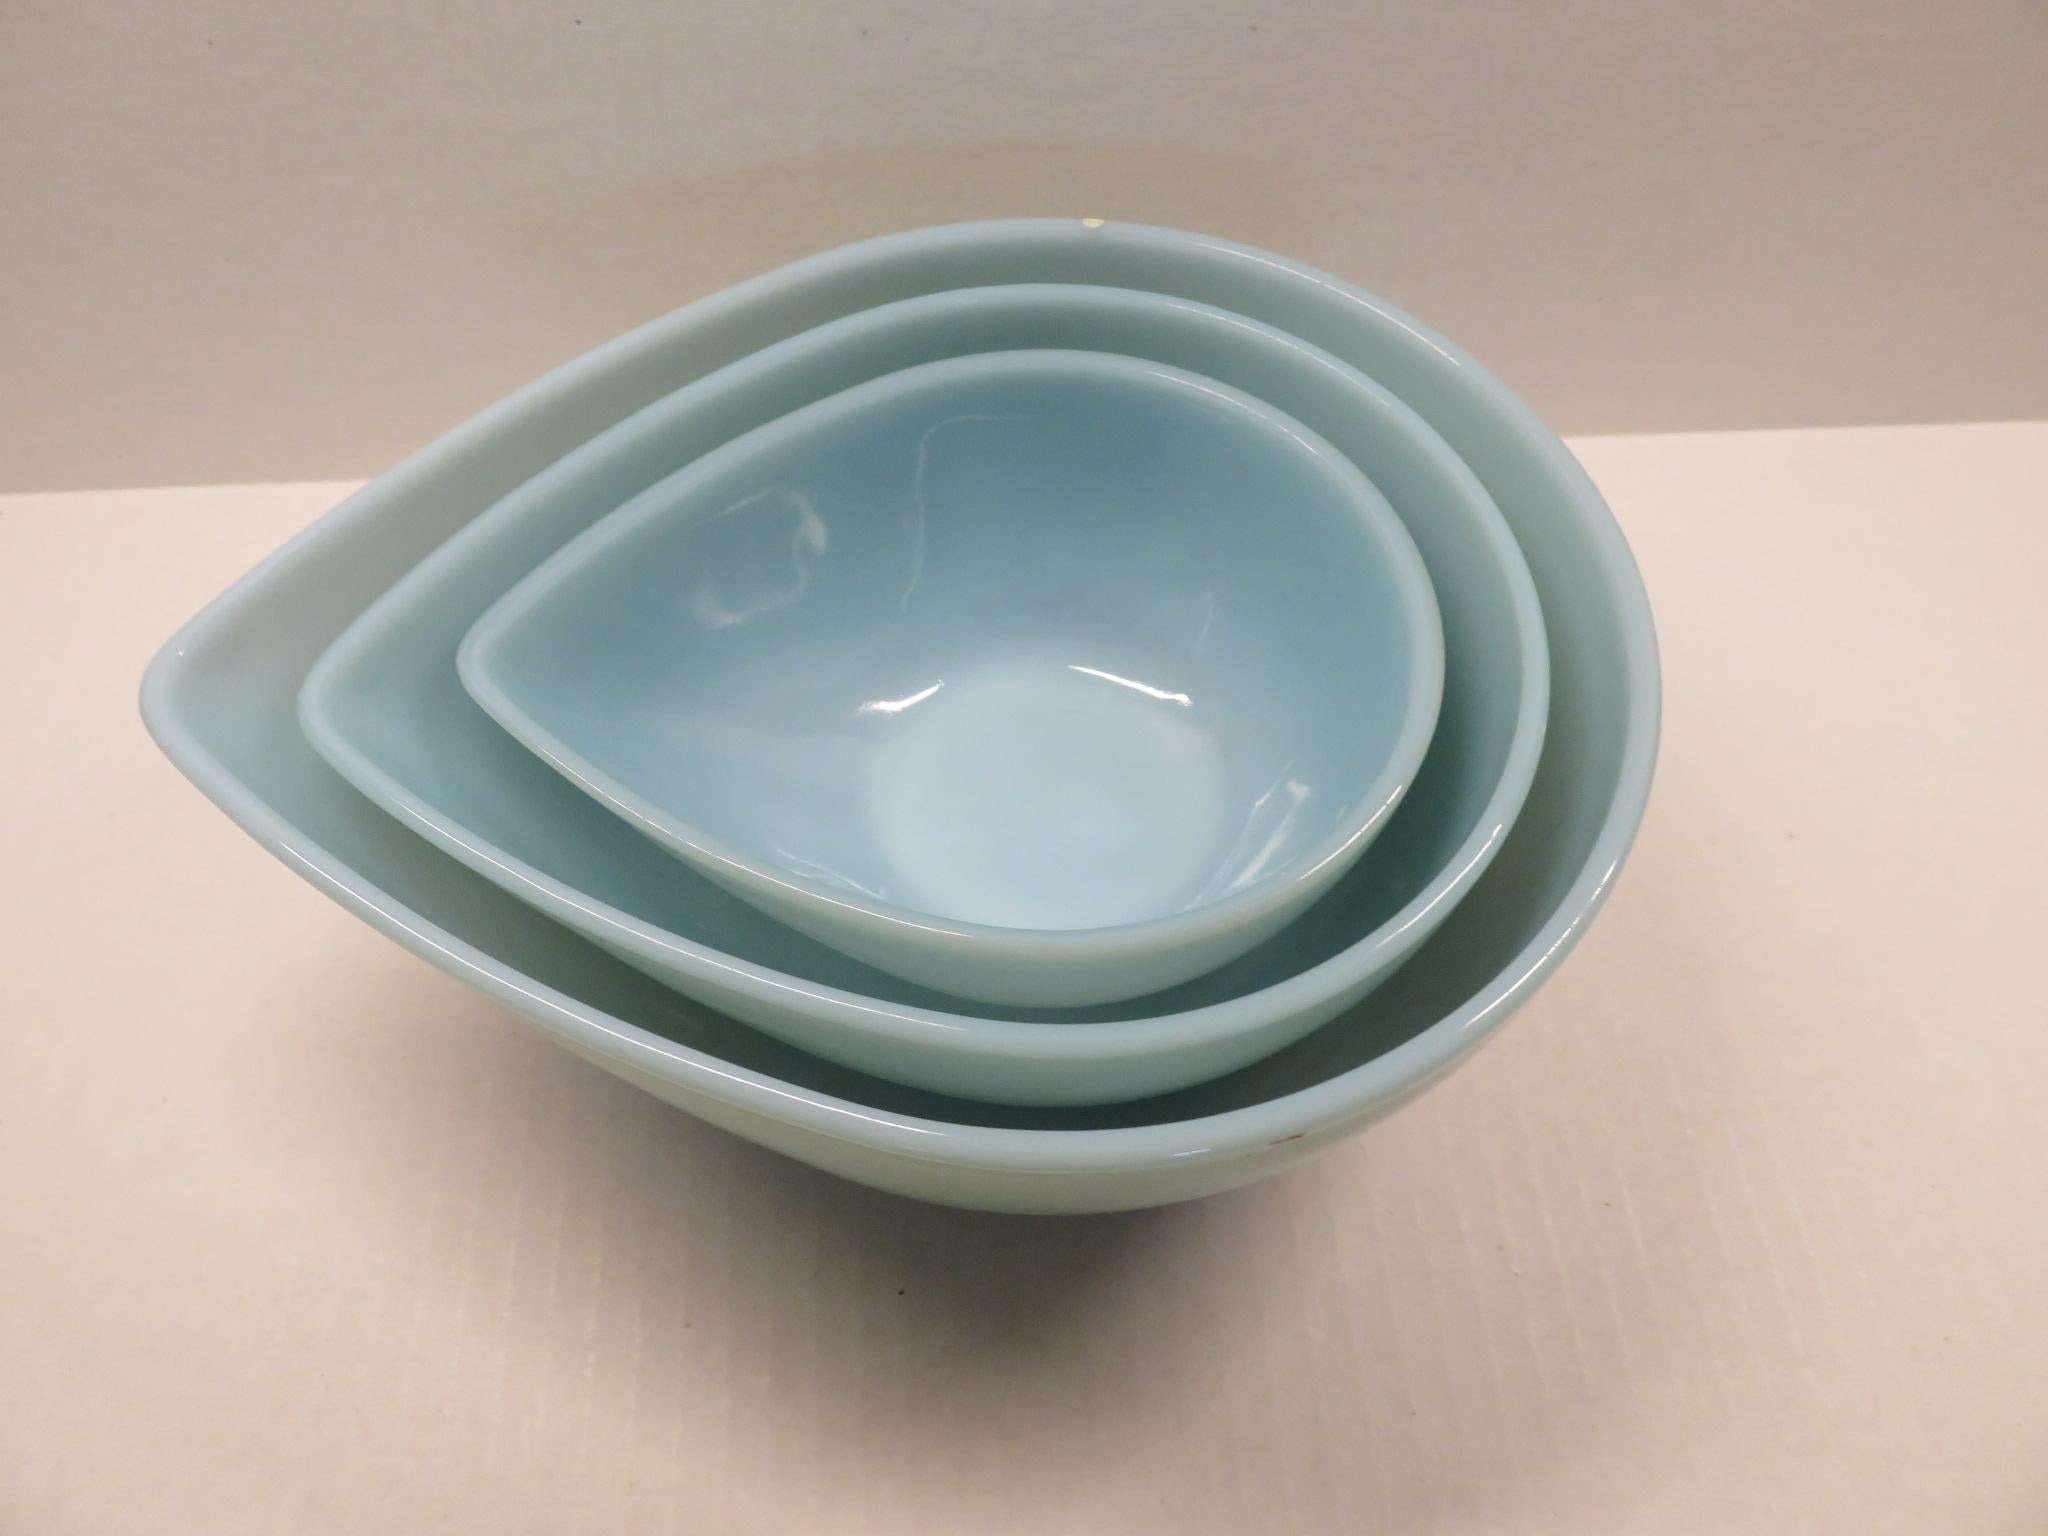 Very collectible, a set of Swedish Modern Fire King Delphite blue teardrop glass stacking bowls.  From 1950s, modern and useful, set of 3 oven safe mixing bowls in a lovely baby blue color and teardrop shape.  All in very good condition with no sign